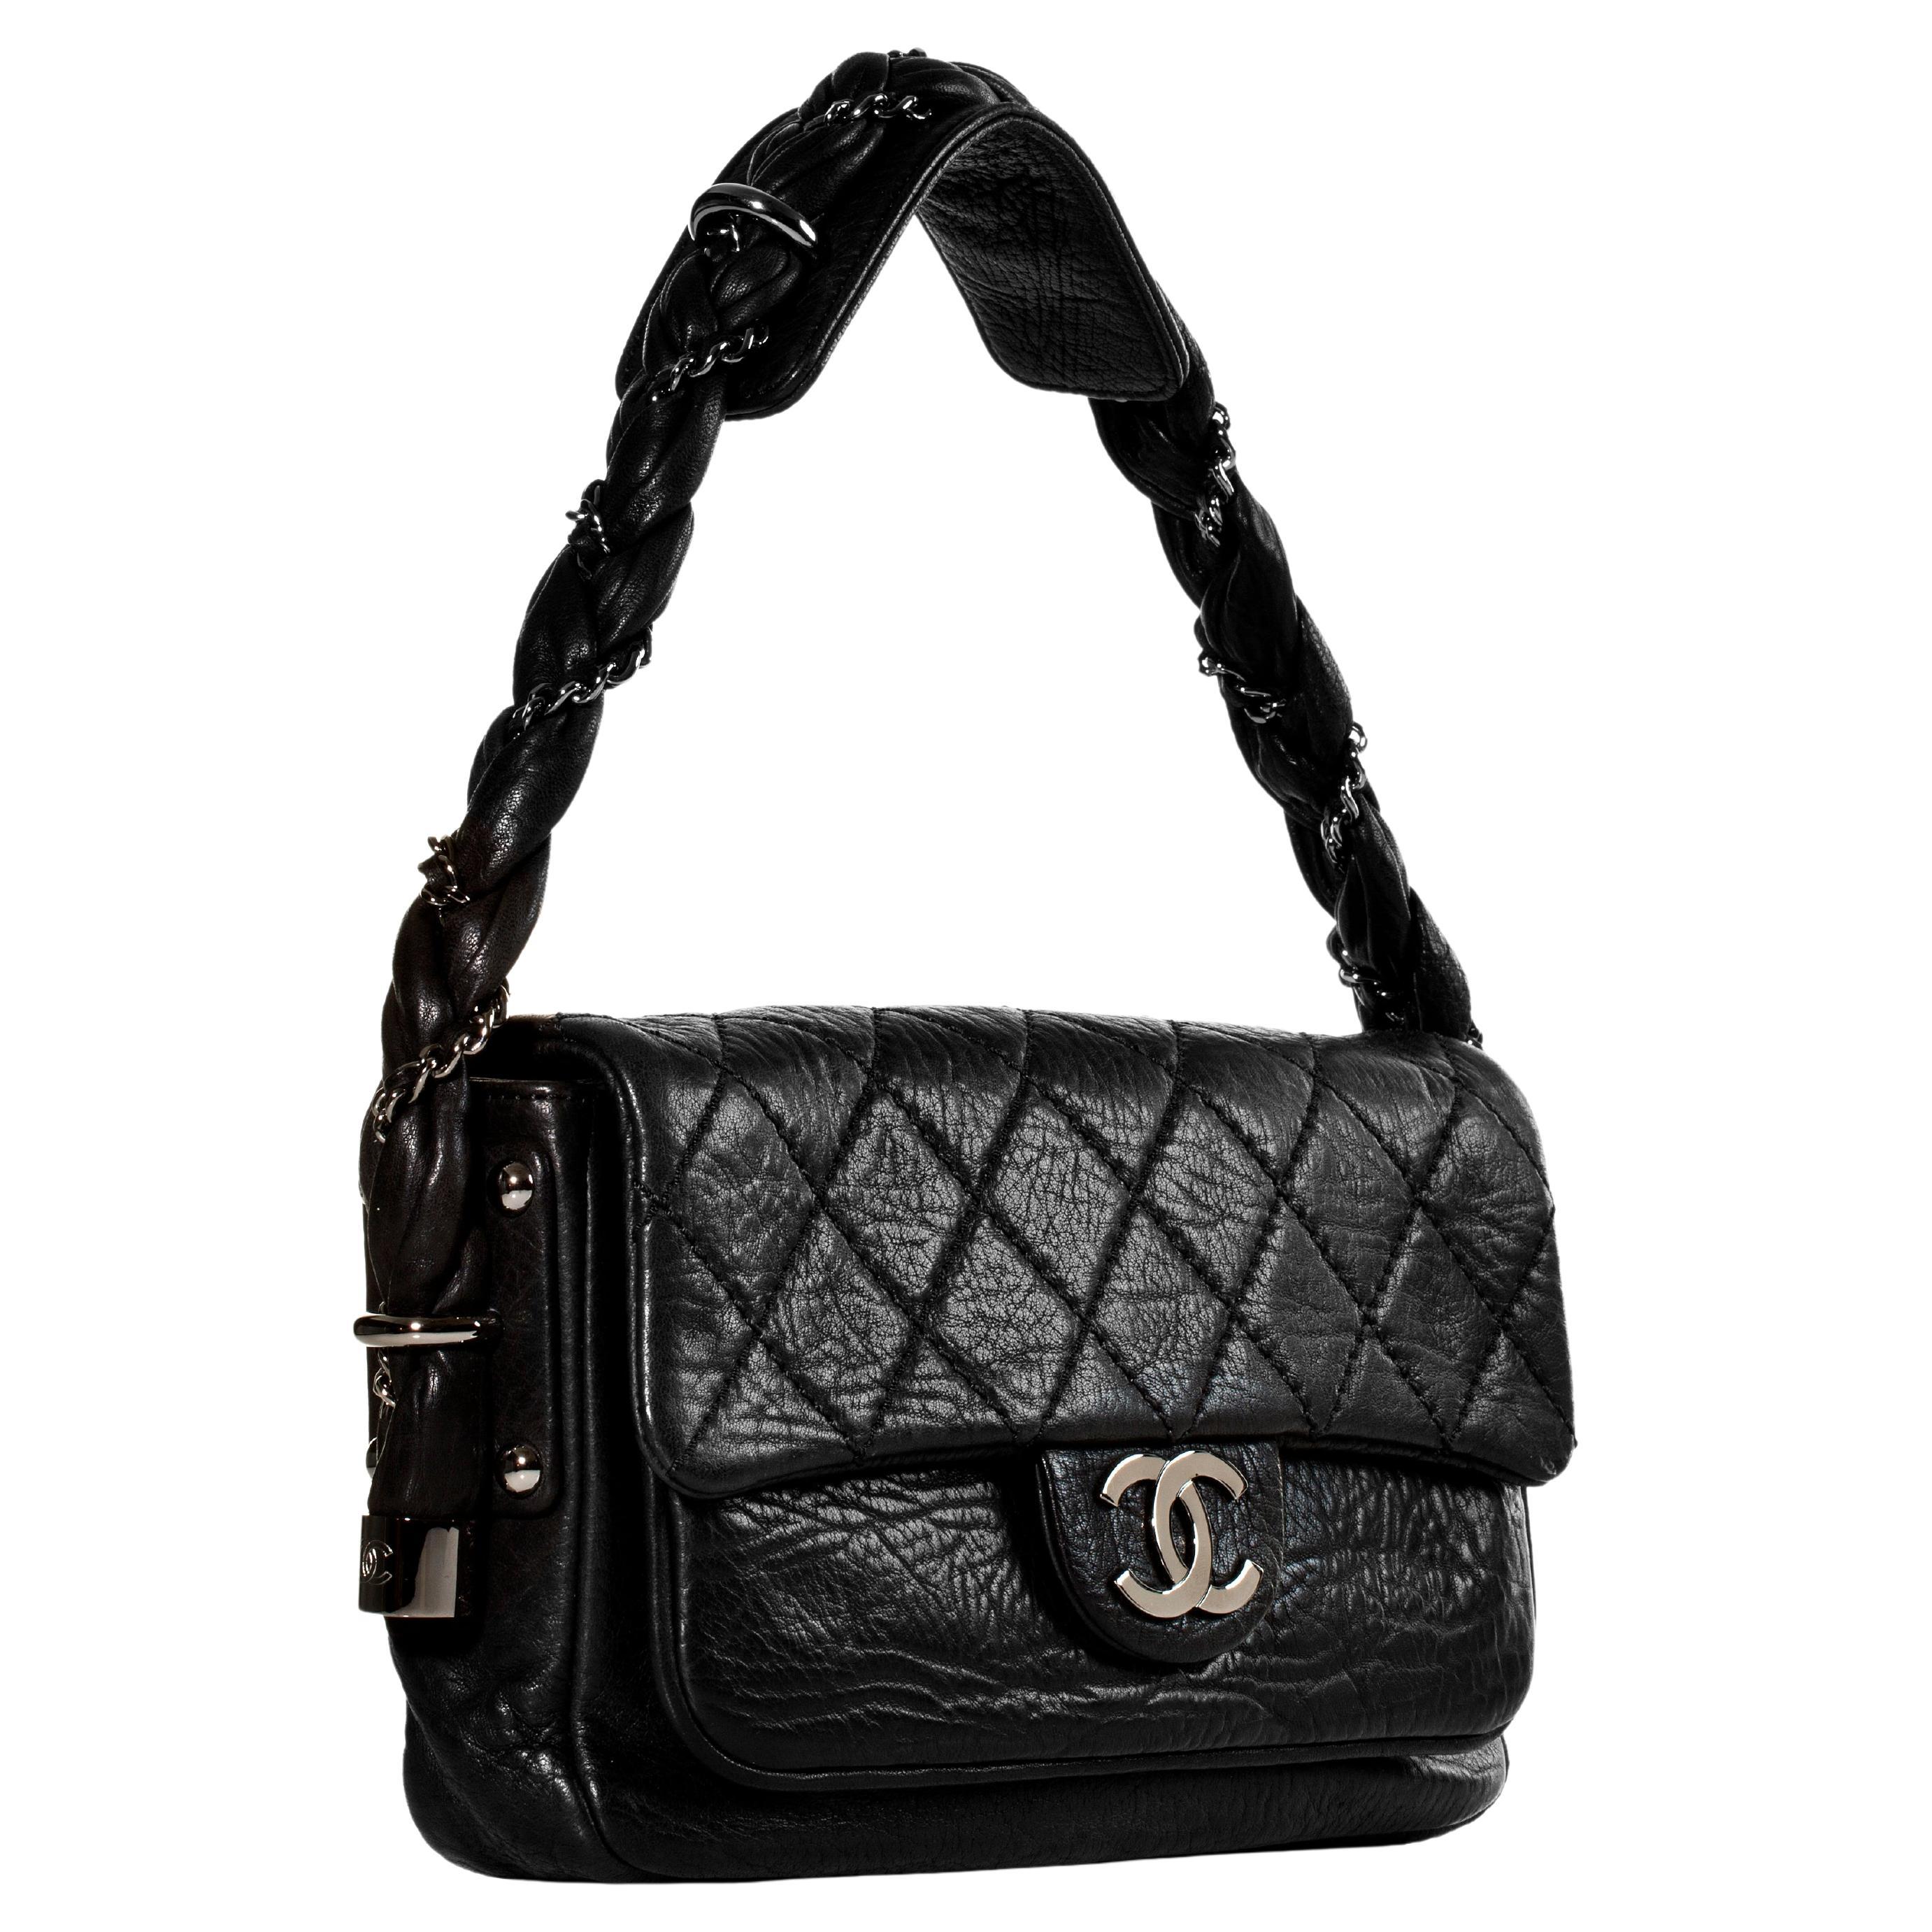 Chanel Lady Braid Quilted Distressed Quilted Lambskin Small Classic Flap Bag

2006 {VINTAGE 17 Years}

Silver hardware
Soft diamond quilted distressed lambskin leather
Top handle is braided leather with signature interwoven chain 
Silver Chanel CC